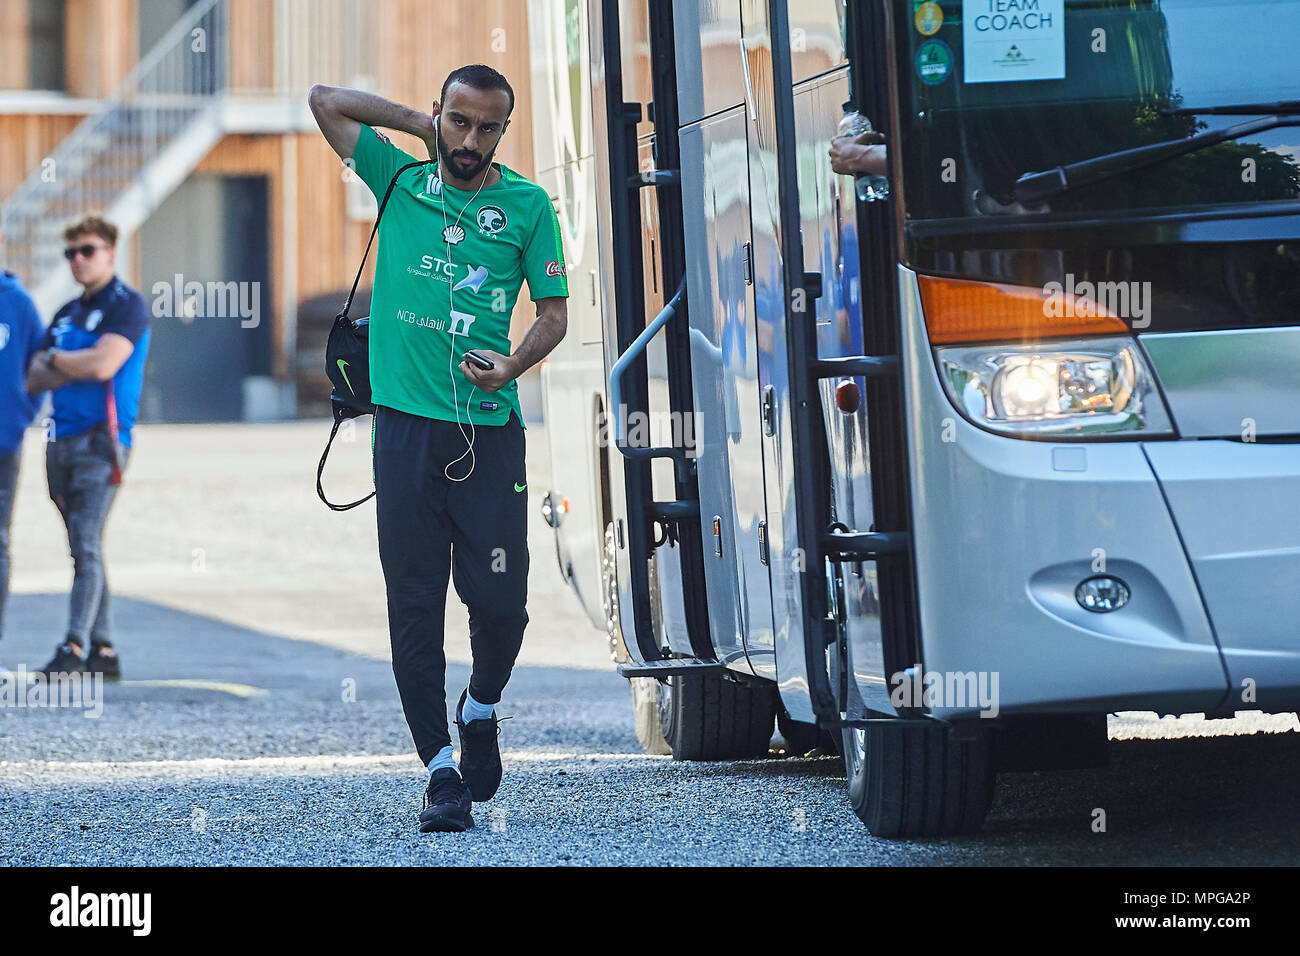 Bad Ragaz, Switzerland. 23rd May 2018. The national football team of Saudi Arabia arrives at the venue for a training session on the sports field Ri-Au in Bad Ragaz. The team around president Adel Ezzat and coach Juan Antonio Pizzi is staying in Bad Ragaz for two and a half weeks in prepararation of the FIFA World Cup final tournament in Russia. Credit: Rolf Simeon/Alamy Live News Stock Photo